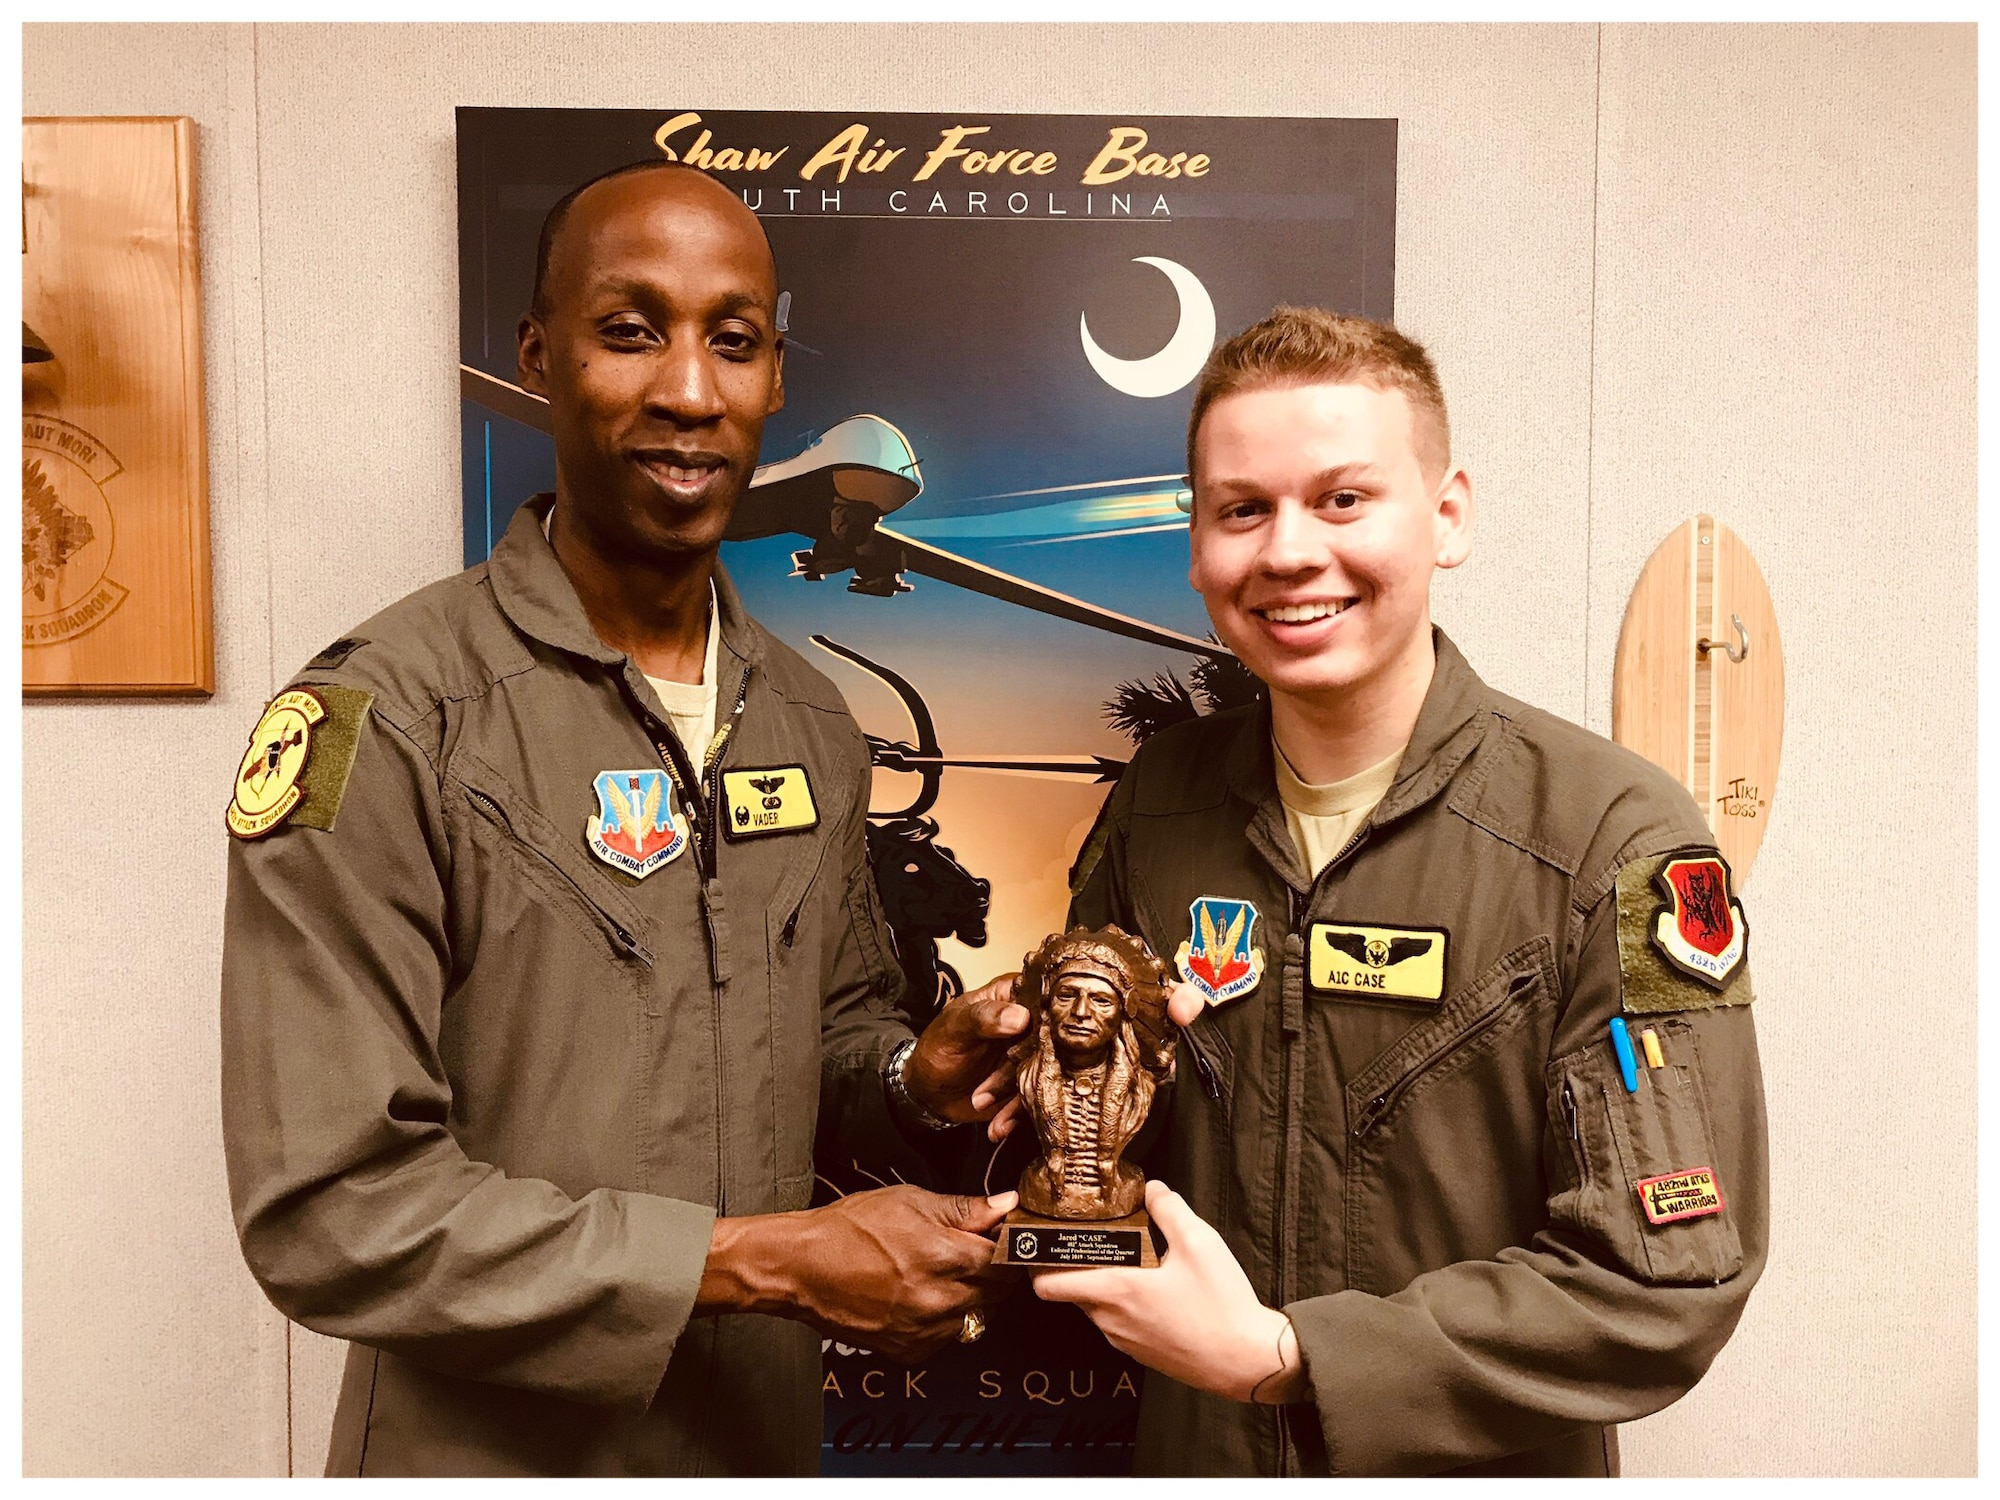 Airman 1st Class Jared, 482nd Attack Squadron, and Lt. Col. Andre, 482nd ATKS, hold a trophy together as they pose for a photo in front of a blue MQ-9 poster.